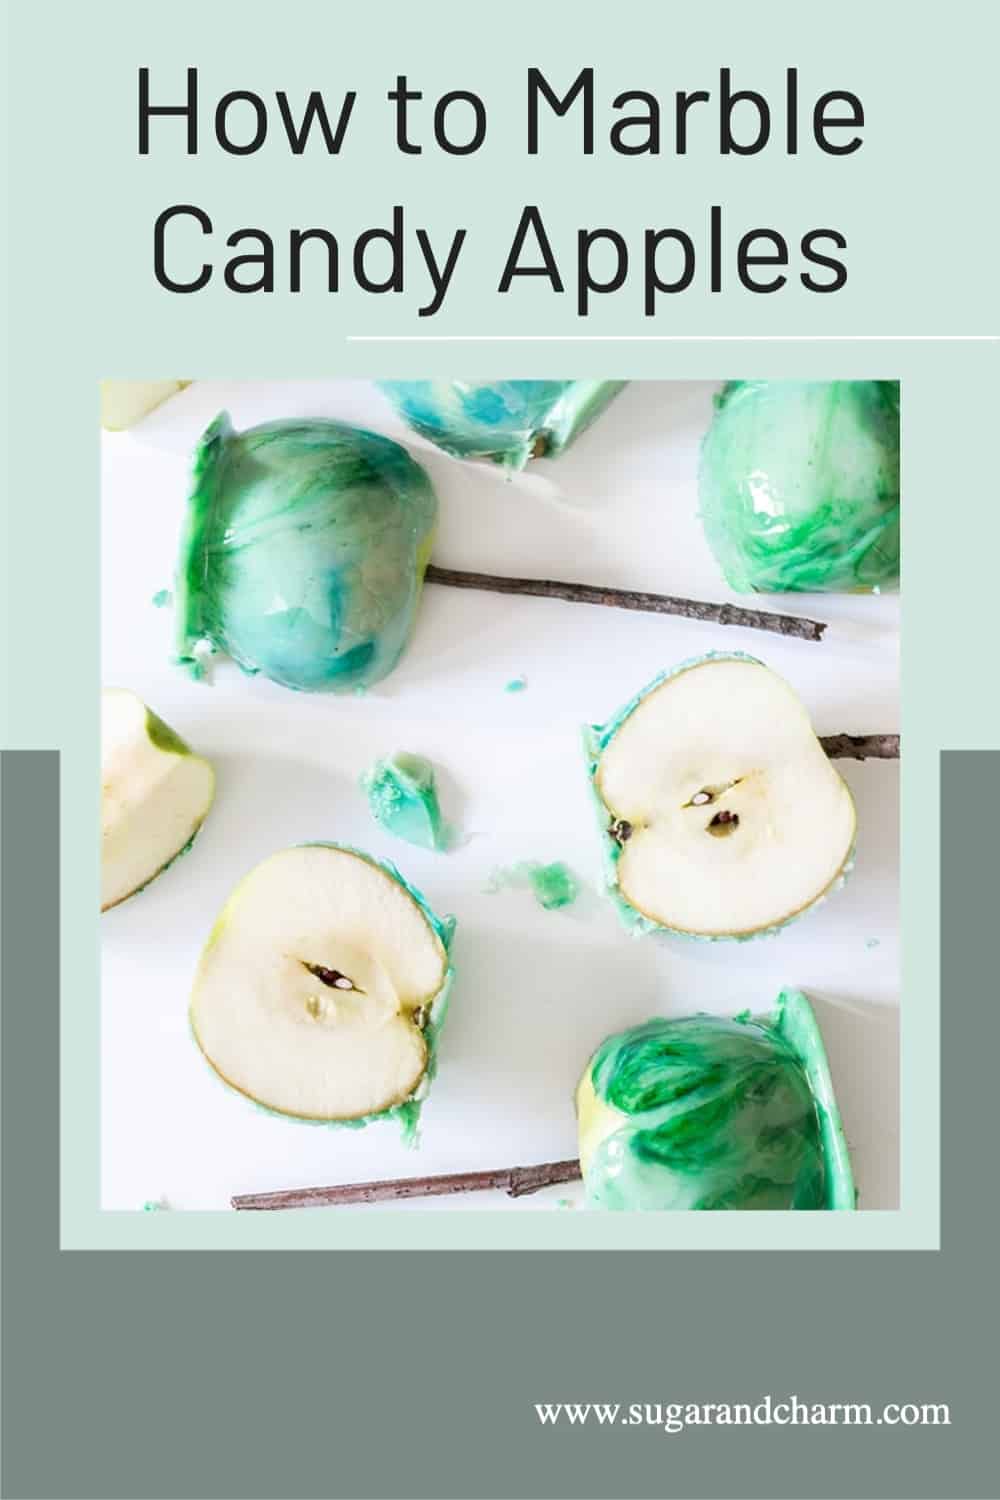 how to make marbled candy applies